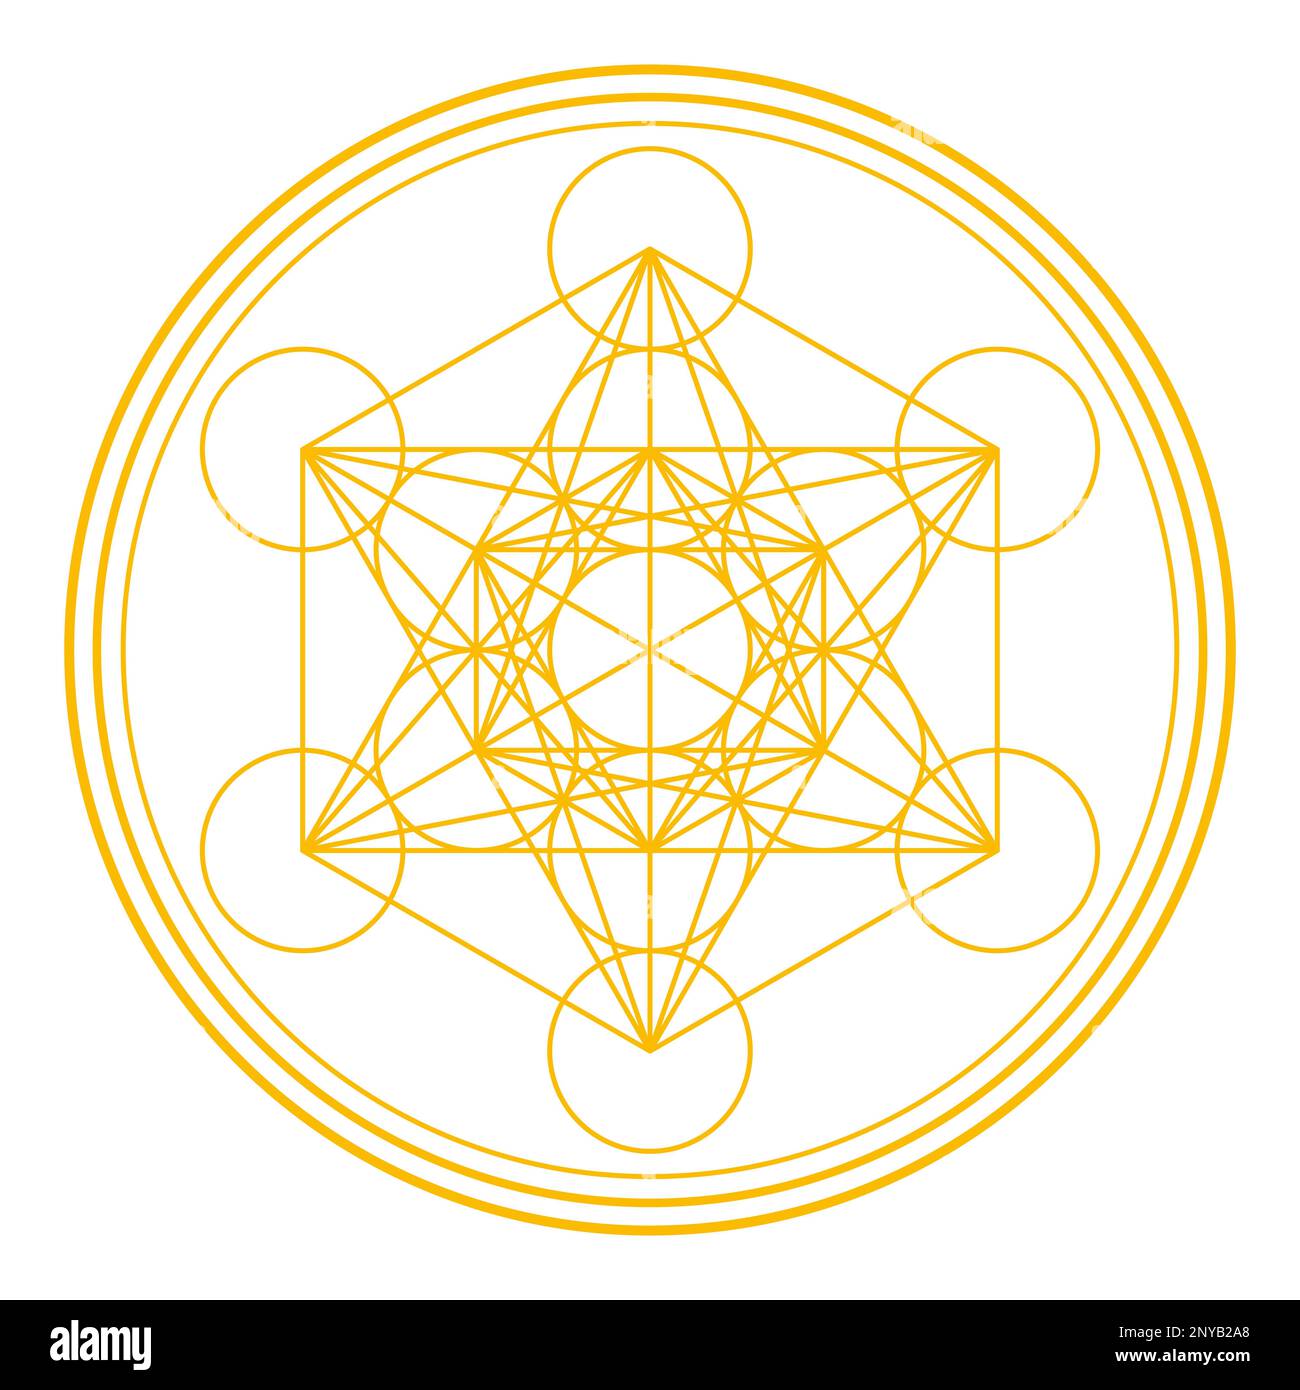 Golden Metatrons Cube, surrounded and framed by three circles. Mystical symbol, derived from the Flower of Life. Stock Photo